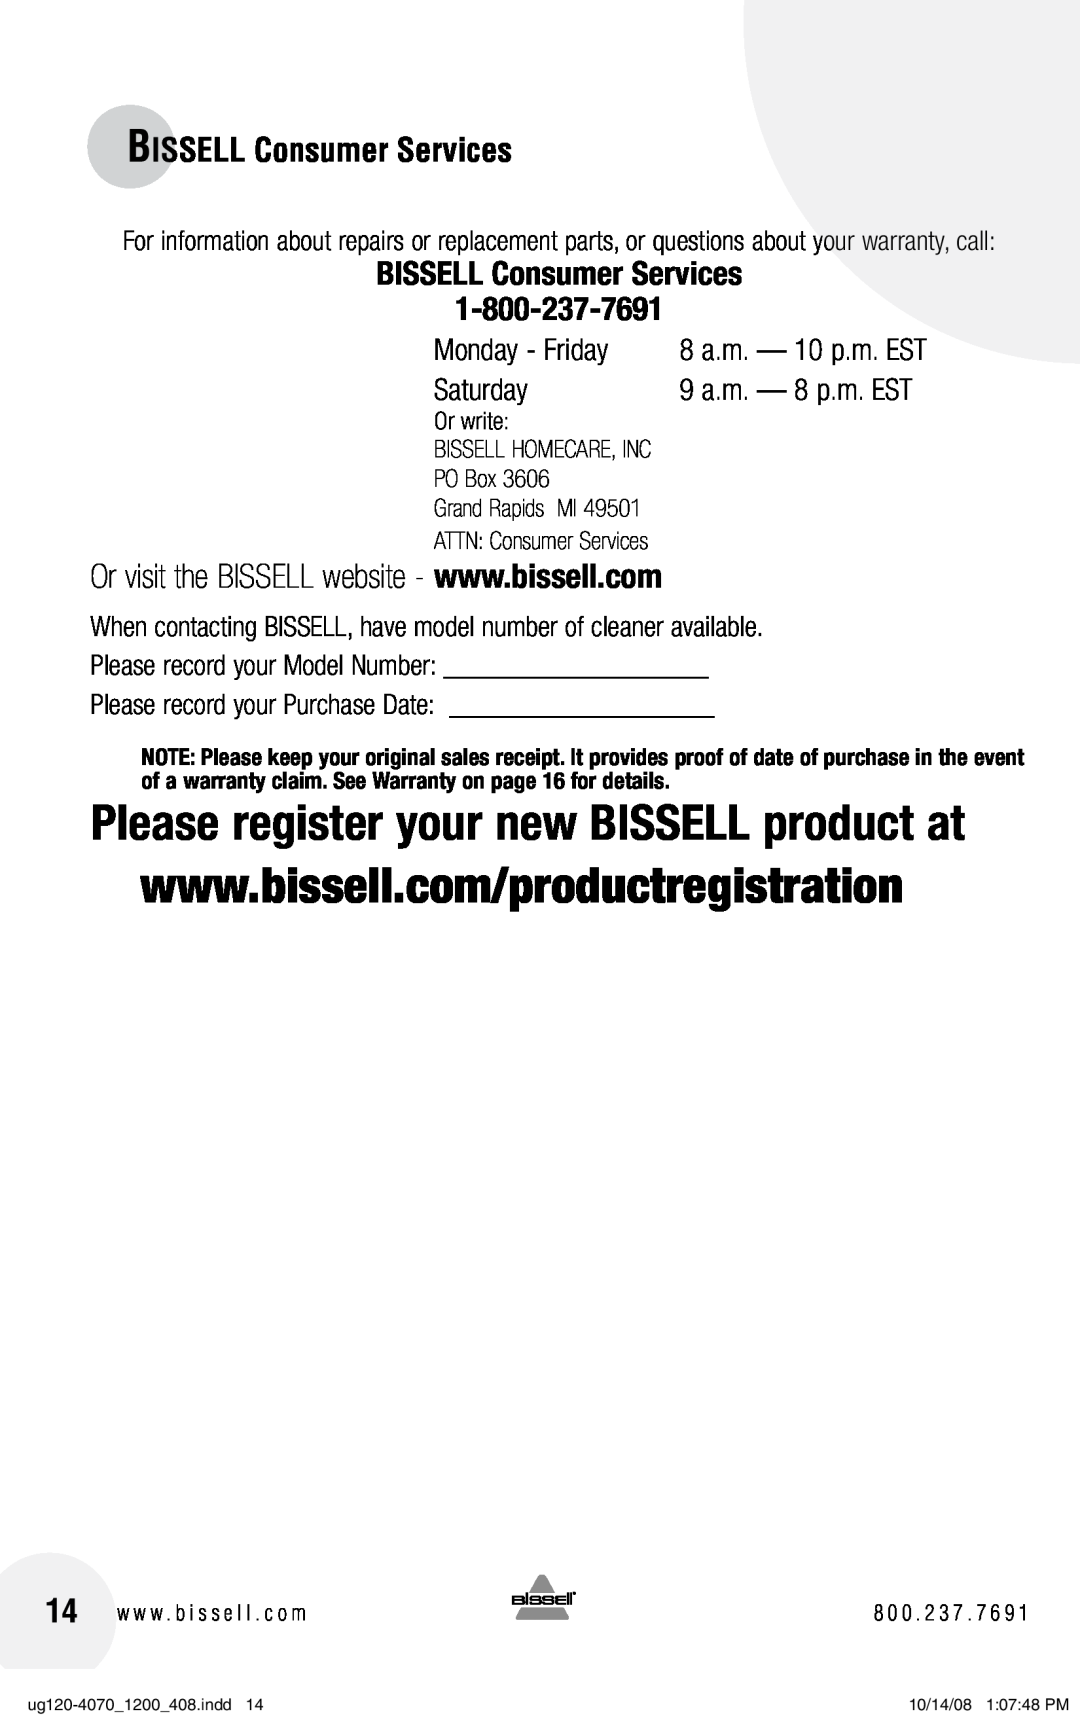 Bissell 1200, 7887 BISSELL Consumer Services, Monday - Friday, Saturday, 8 a.m. - 10 p.m. EST, 9 a.m. - 8 p.m. EST, PO Box 